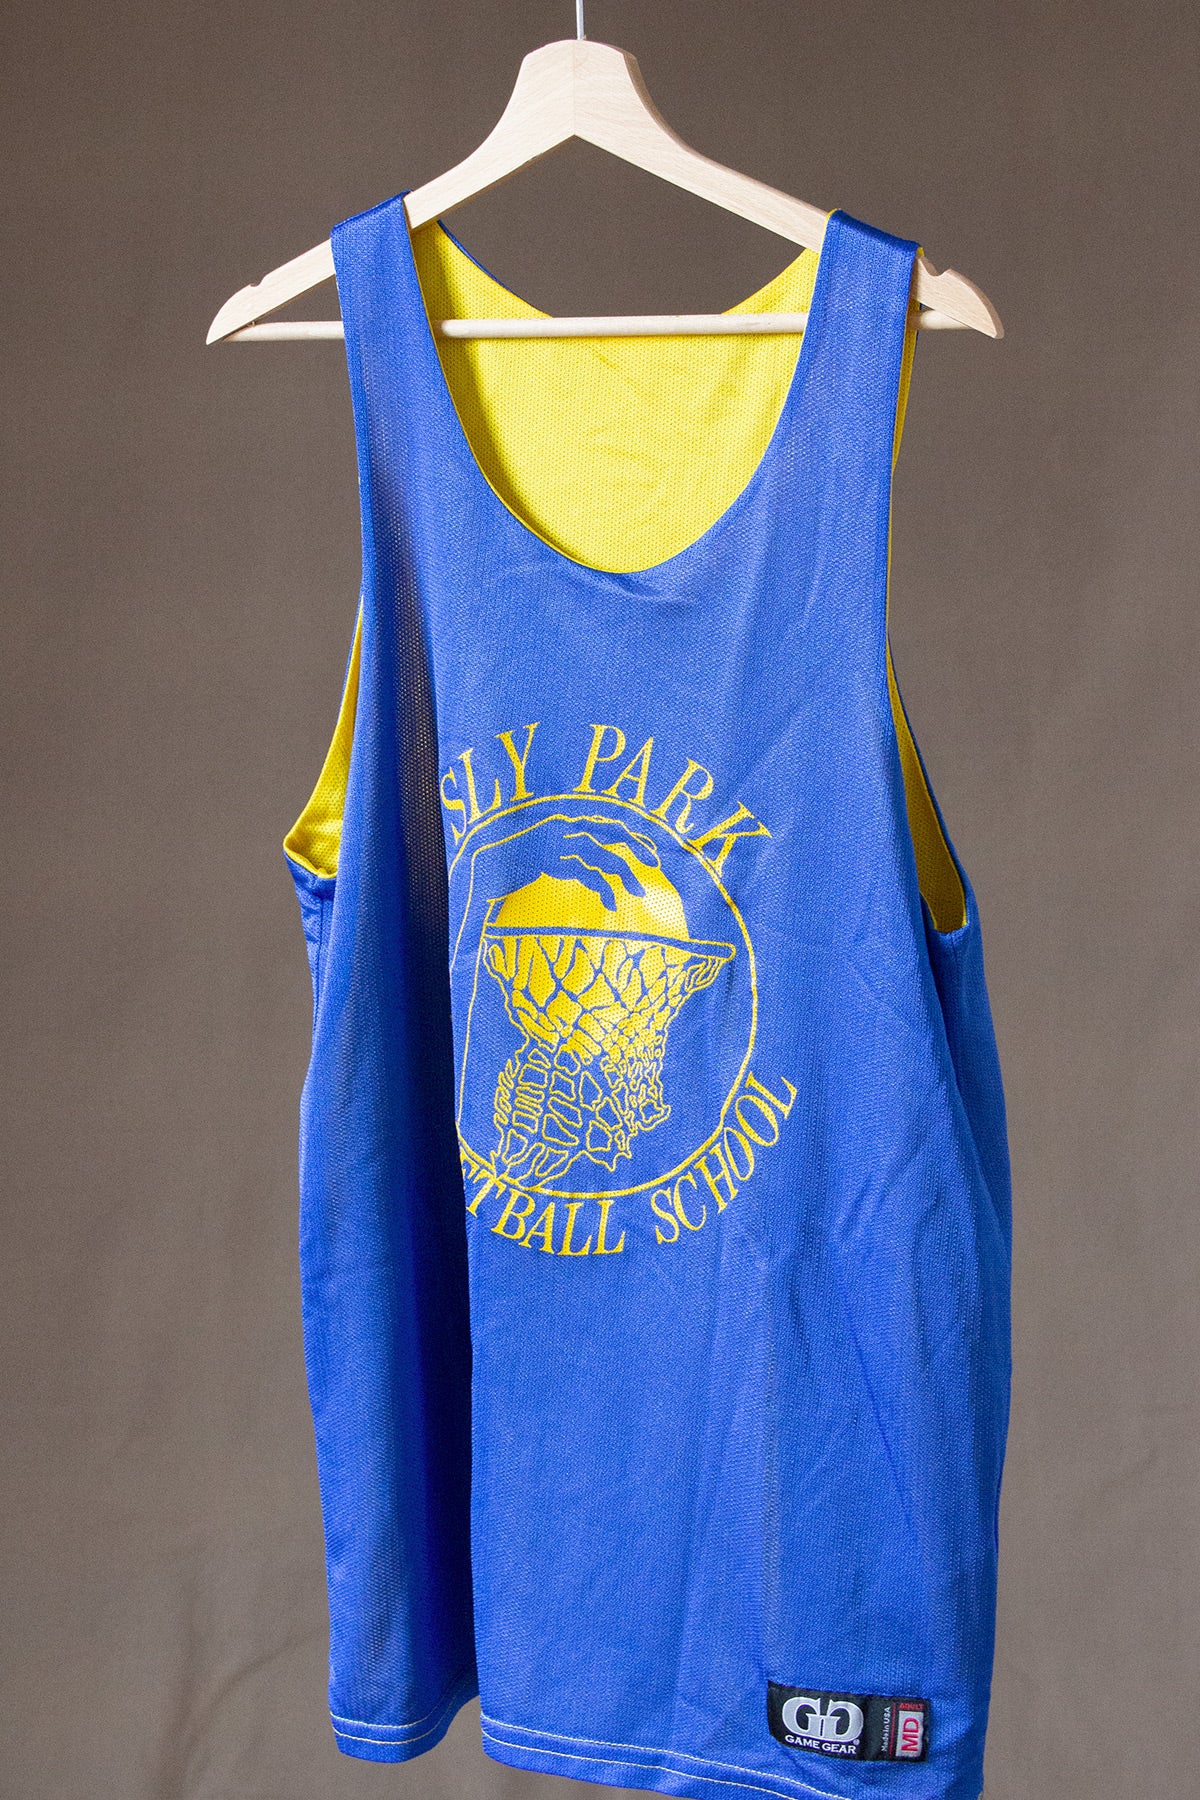 Maillot Sly Park Basketball School